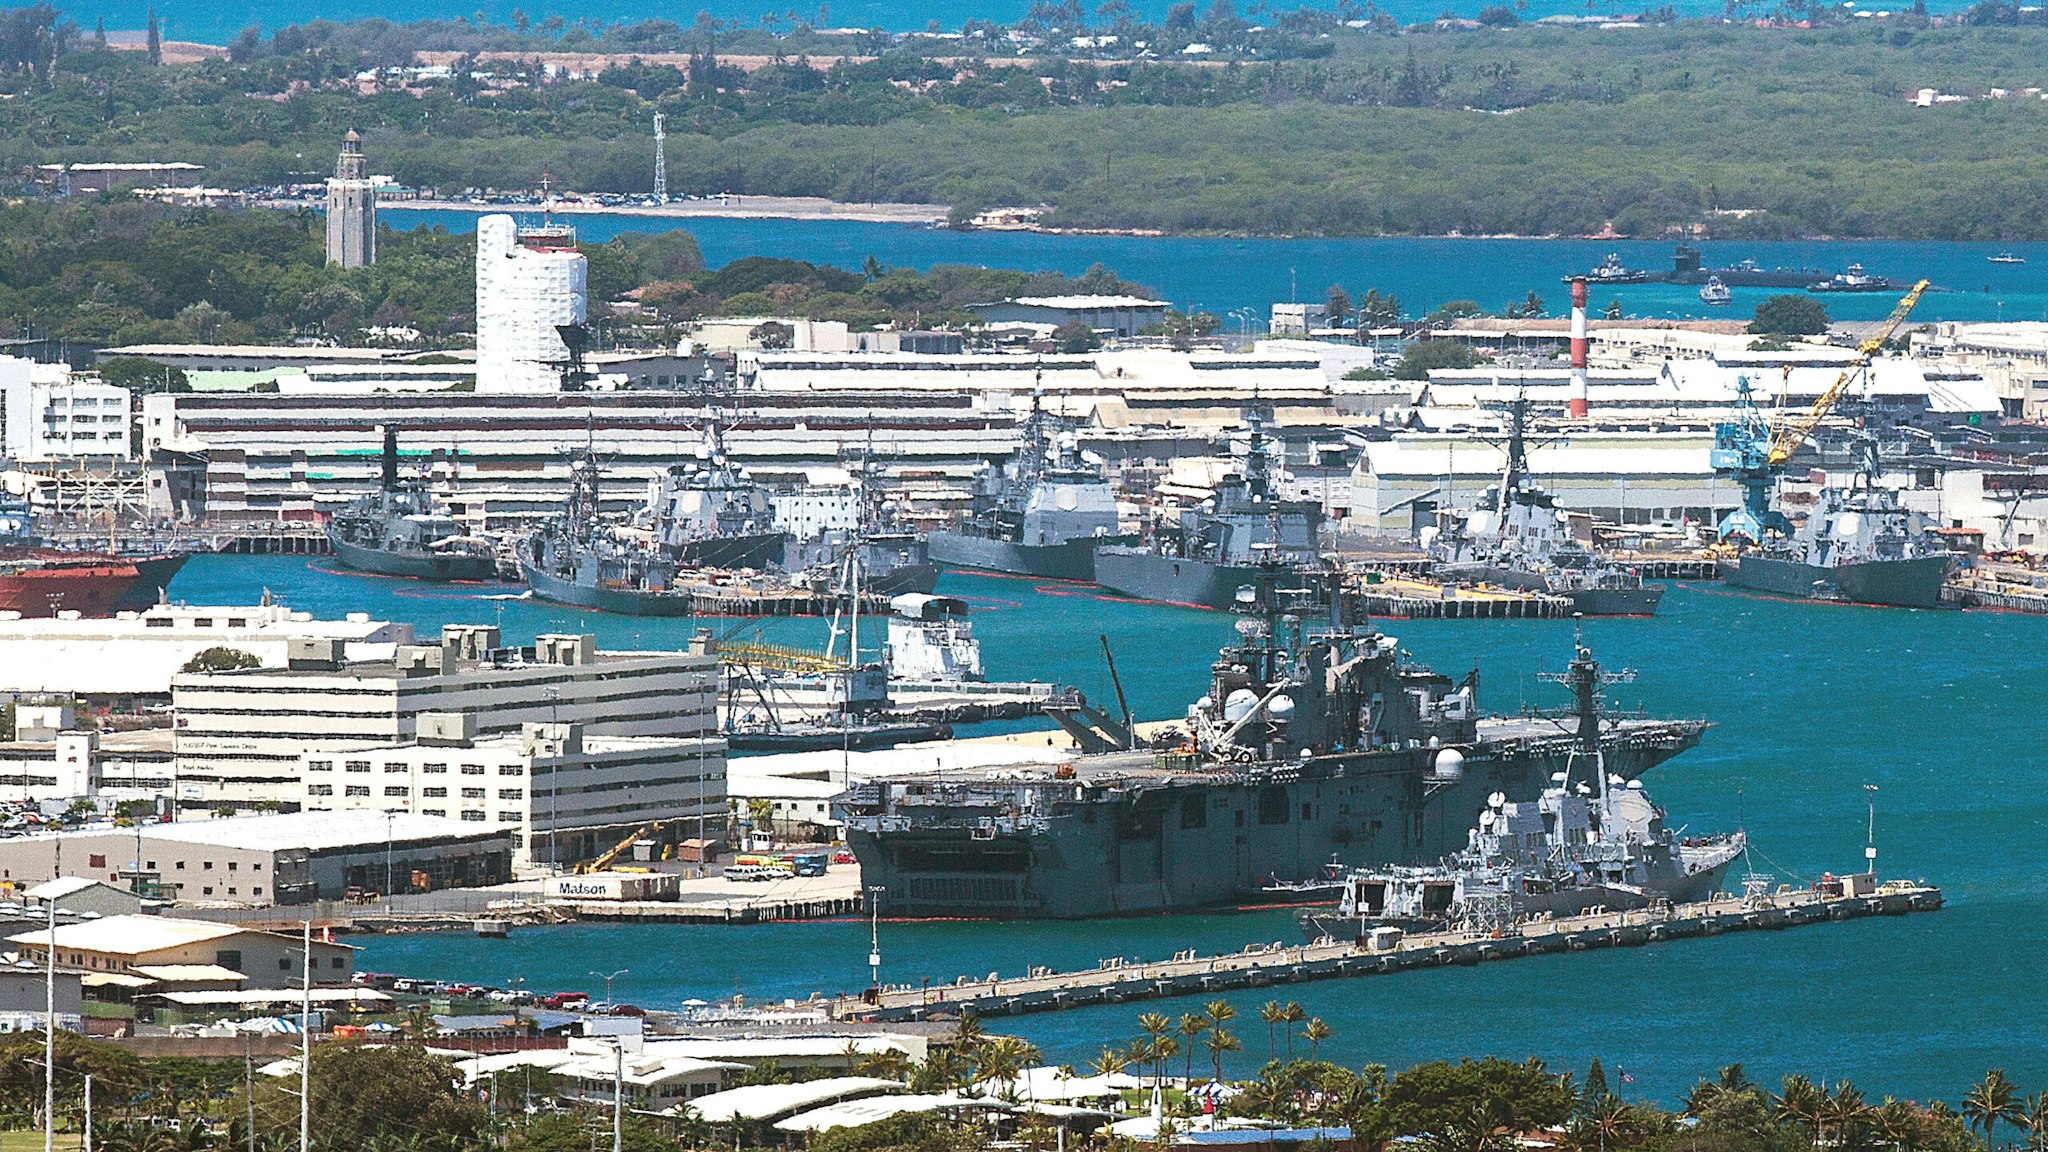 A general view of Joint Base Pearl Harbor-Hickam on Friday, June 29, 2012 in Pearl Harbor, Hawaii. Twenty-two nations, 42 ships, six submarines, more than 200 aircraft and 25,000 personnel will participate in the biennial RIMPAC exercise from June 29 to August 3, in and around the Hawaiian Islands.